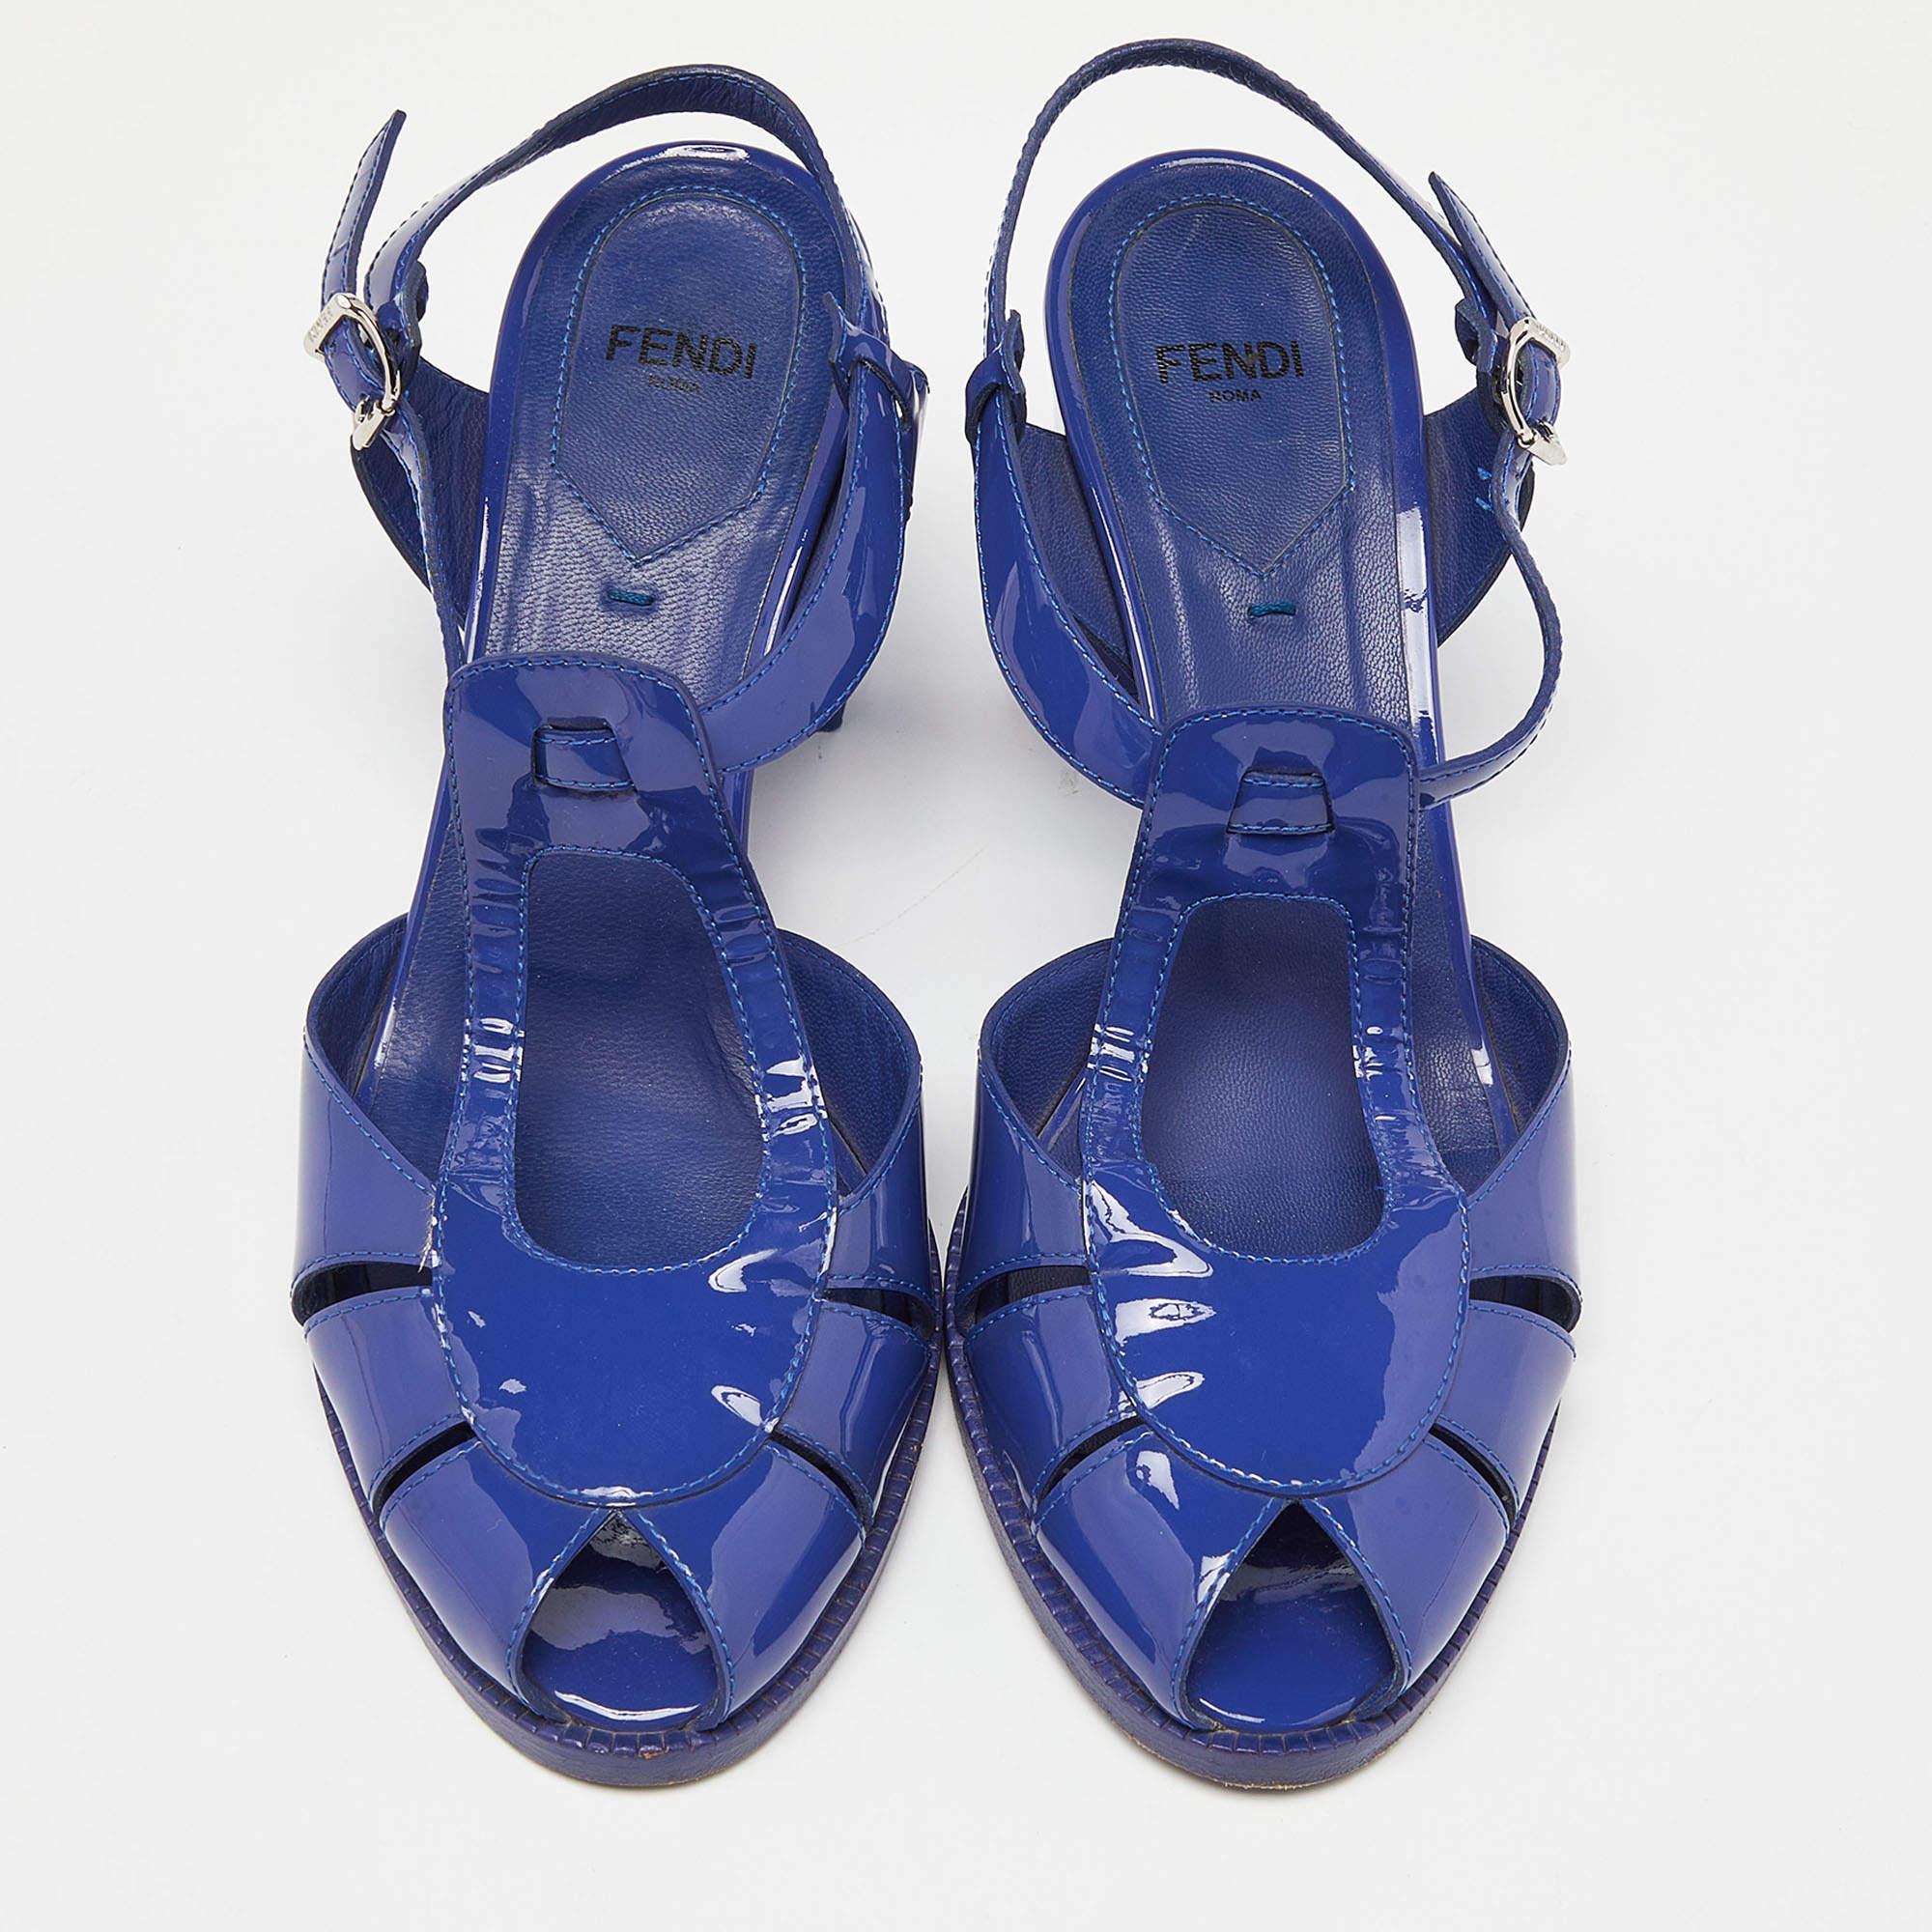 Stylish cut-out details and a striking blue hue define these Fendi sandals. Made from patent leather, they are secured with an ankle buckle closure and are stacked upon block heels.

Includes: Original Dustbag

